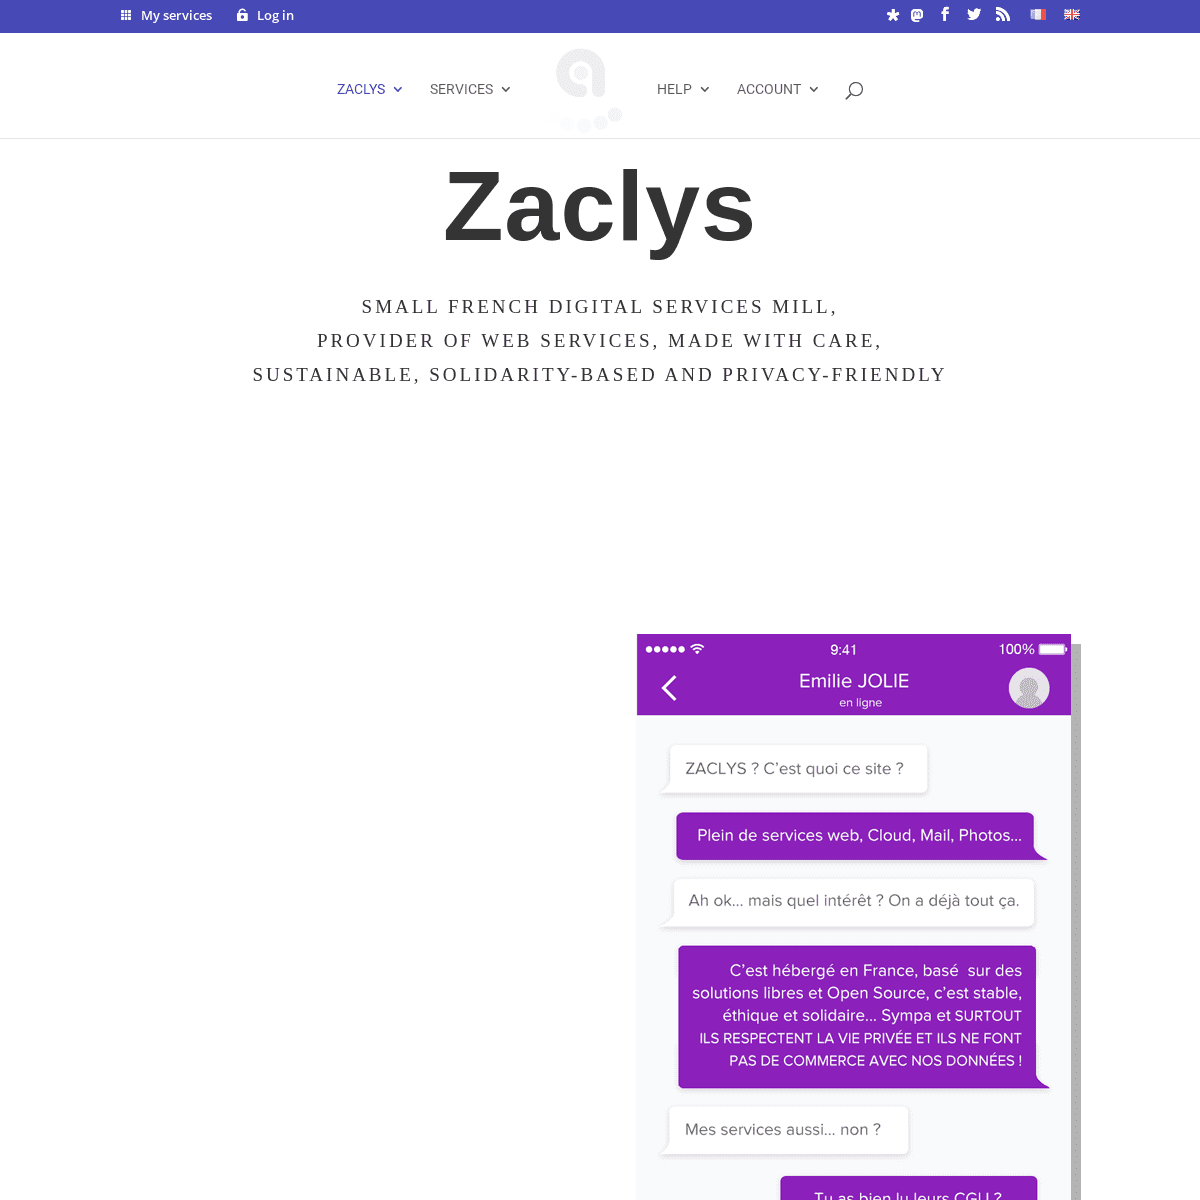 A complete backup of https://zaclys.com